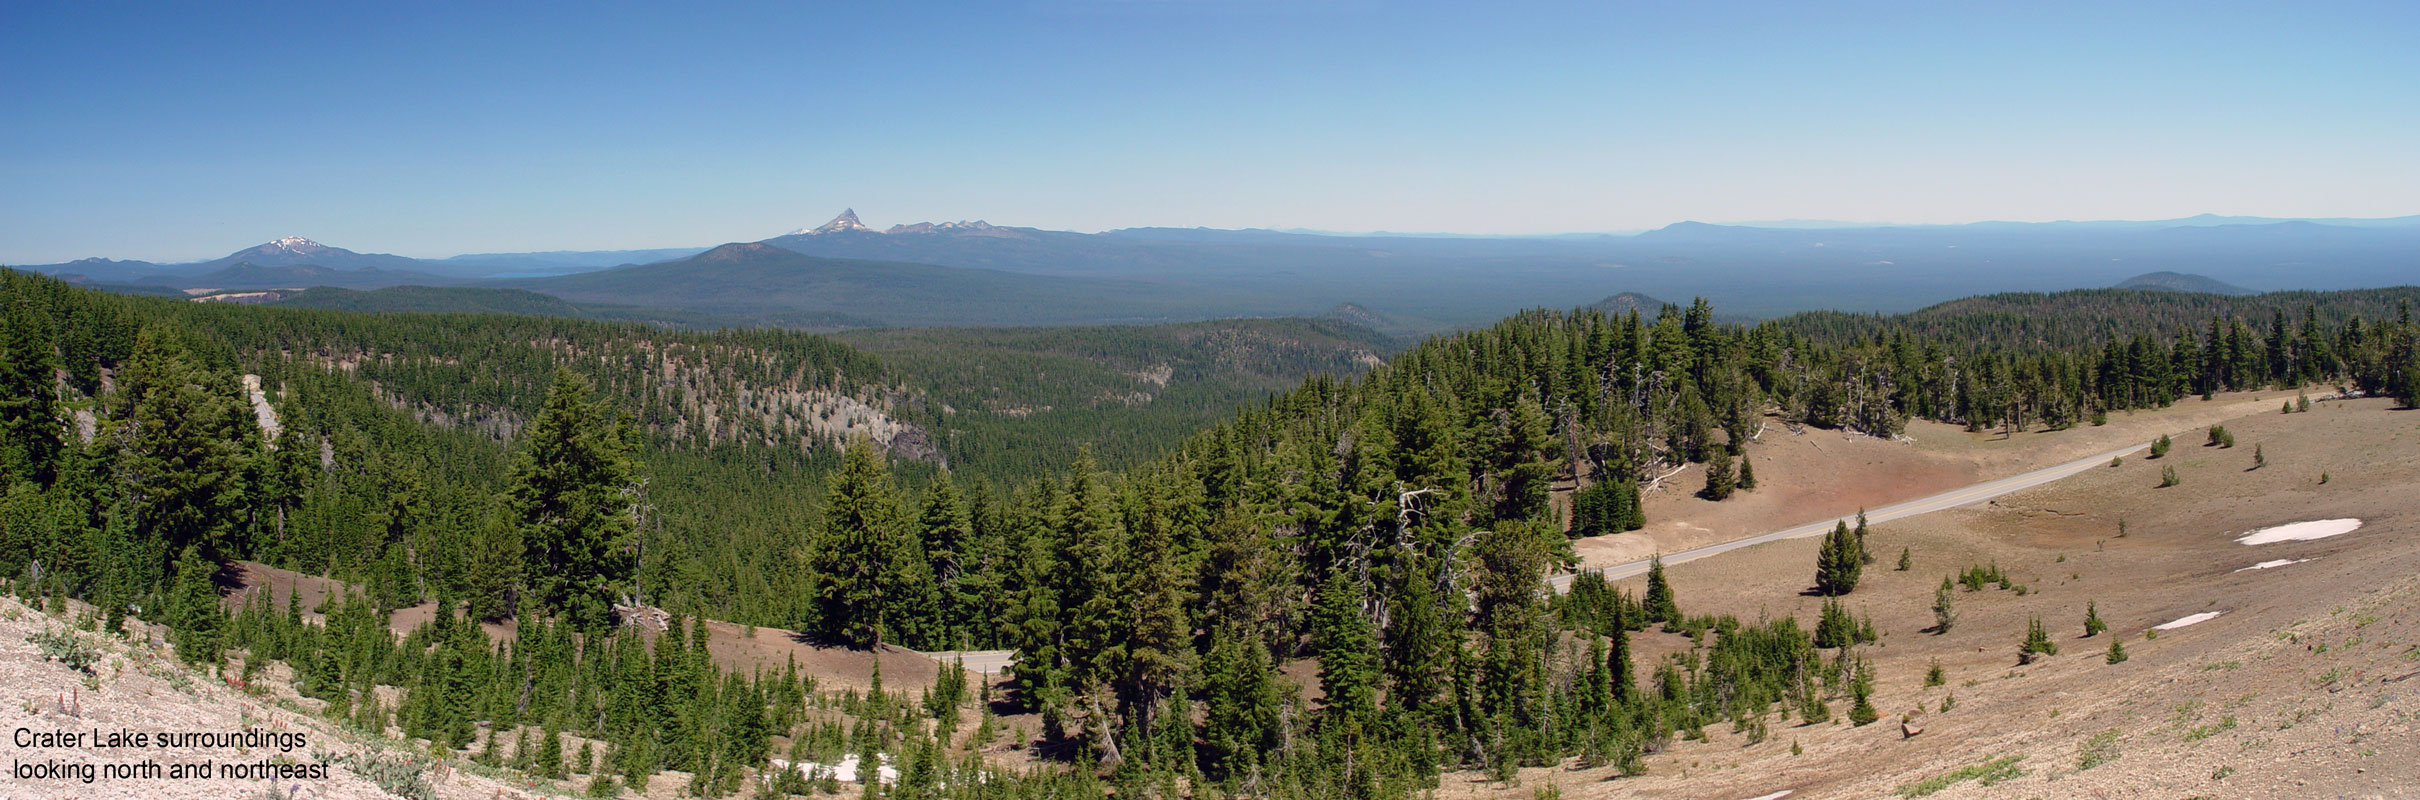 Looking N-NW from Crater Lake